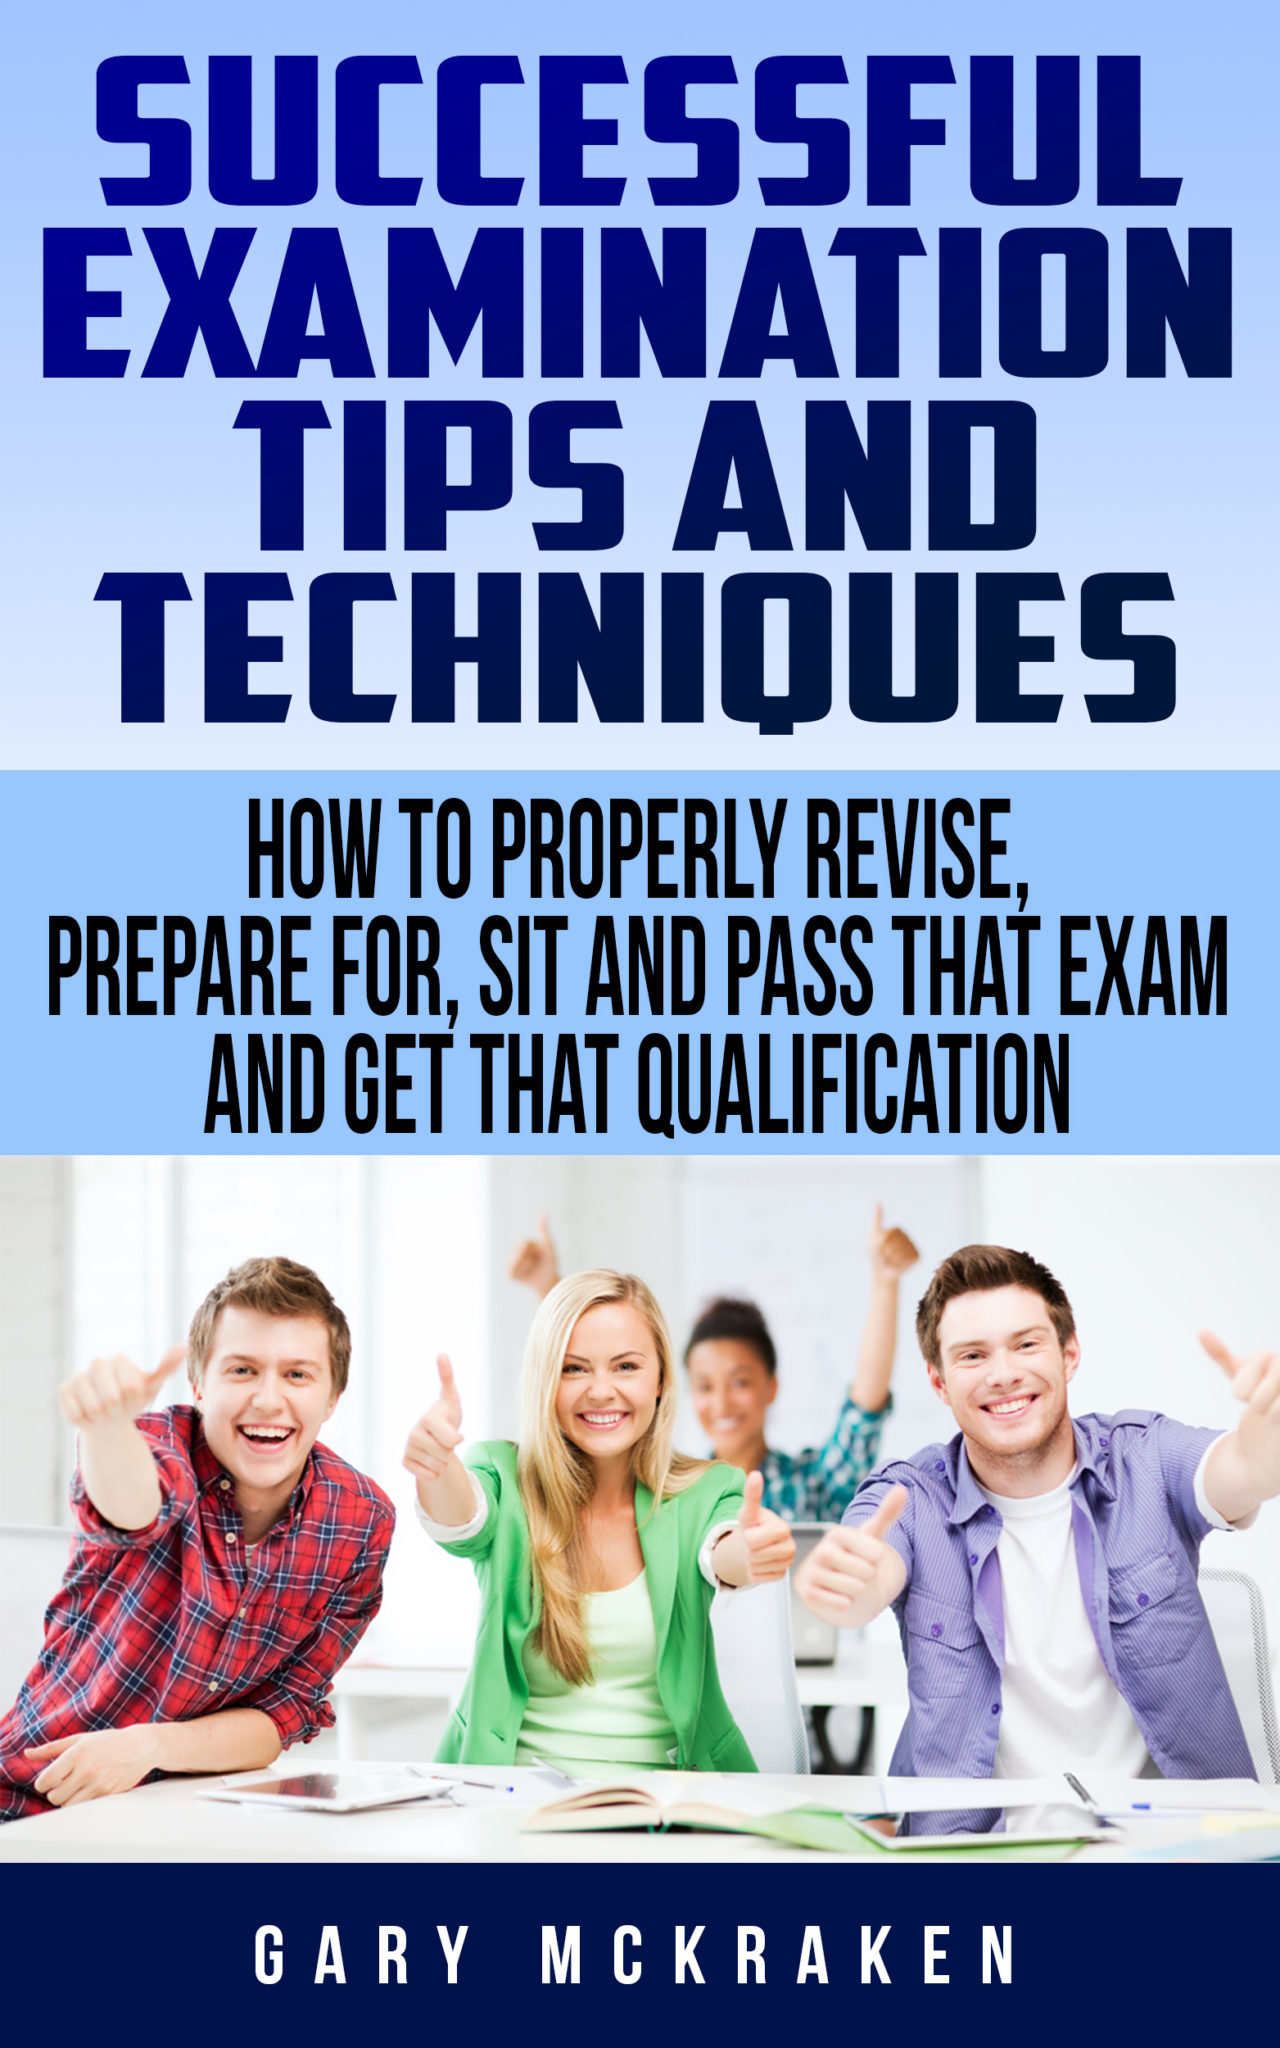 FREE: Successful Examination Tips and Techniques by Gary McKraken